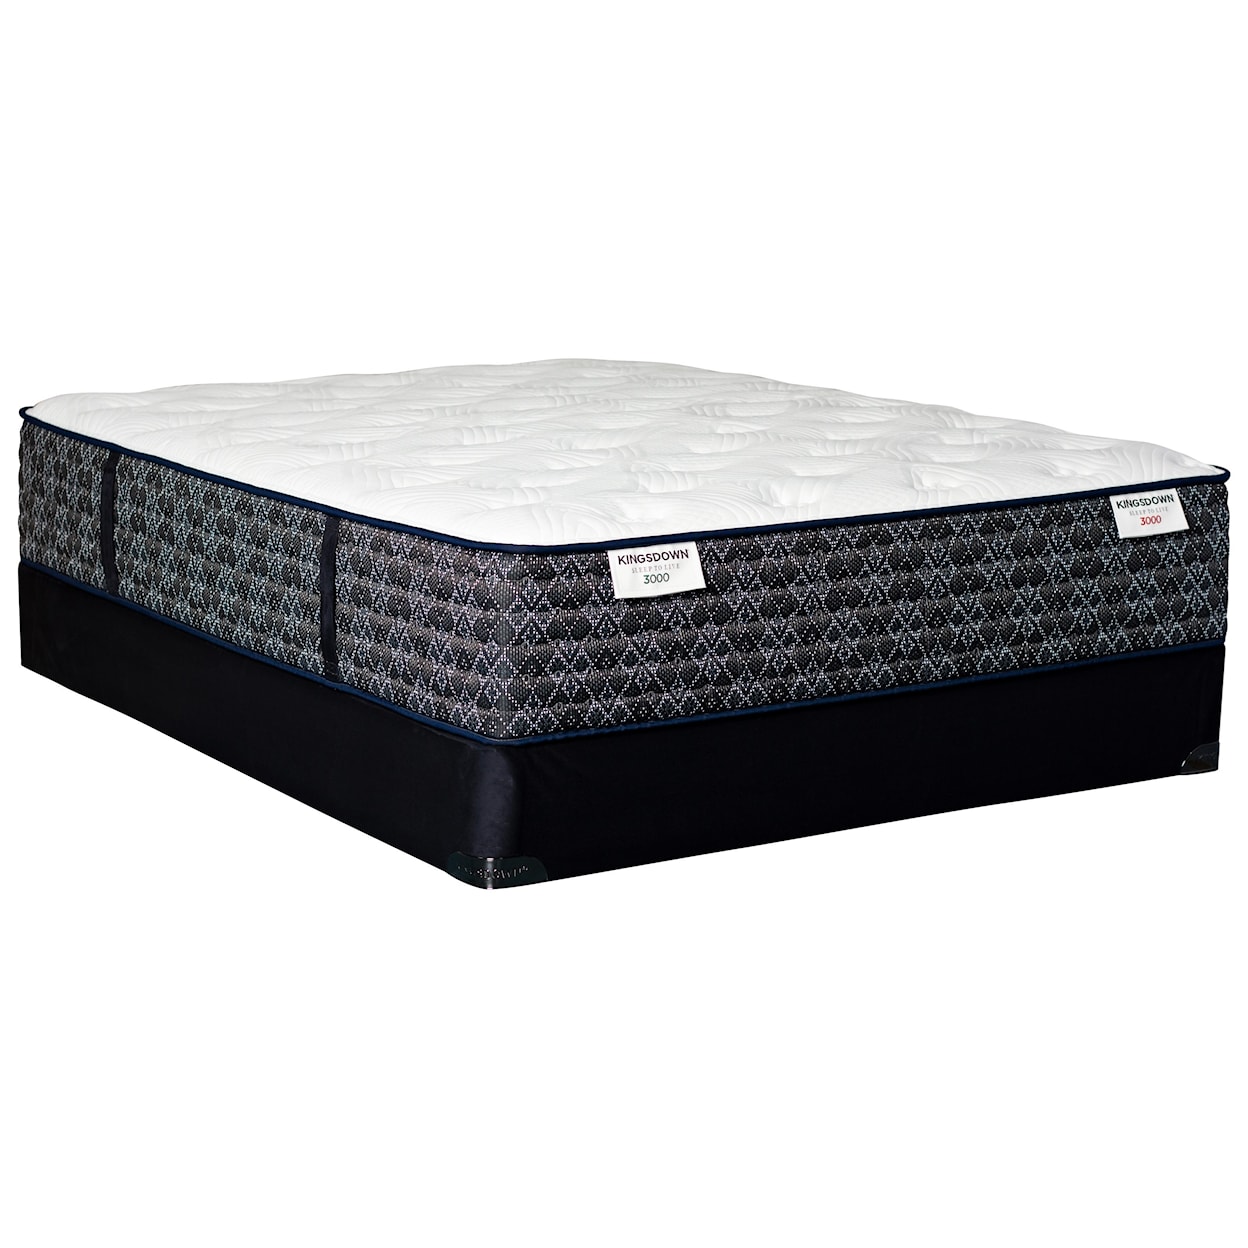 Kingsdown Sleep to Live 3000 Green Red Twin Pocketed Coil Mattress Set